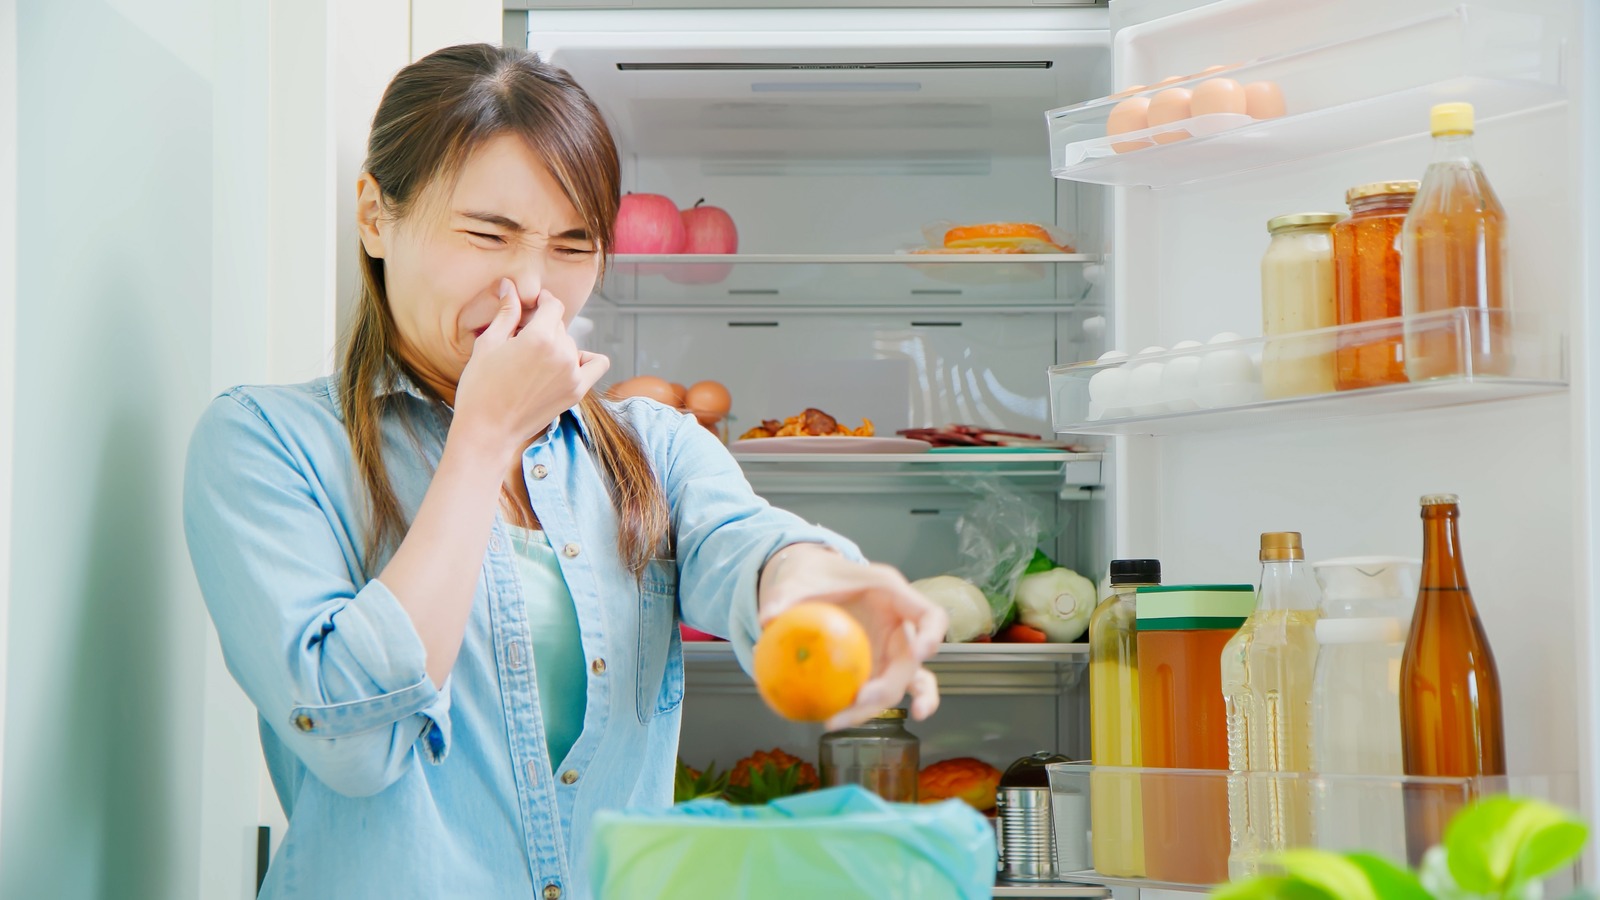 What To Do If You Find Mold In Your Fridge